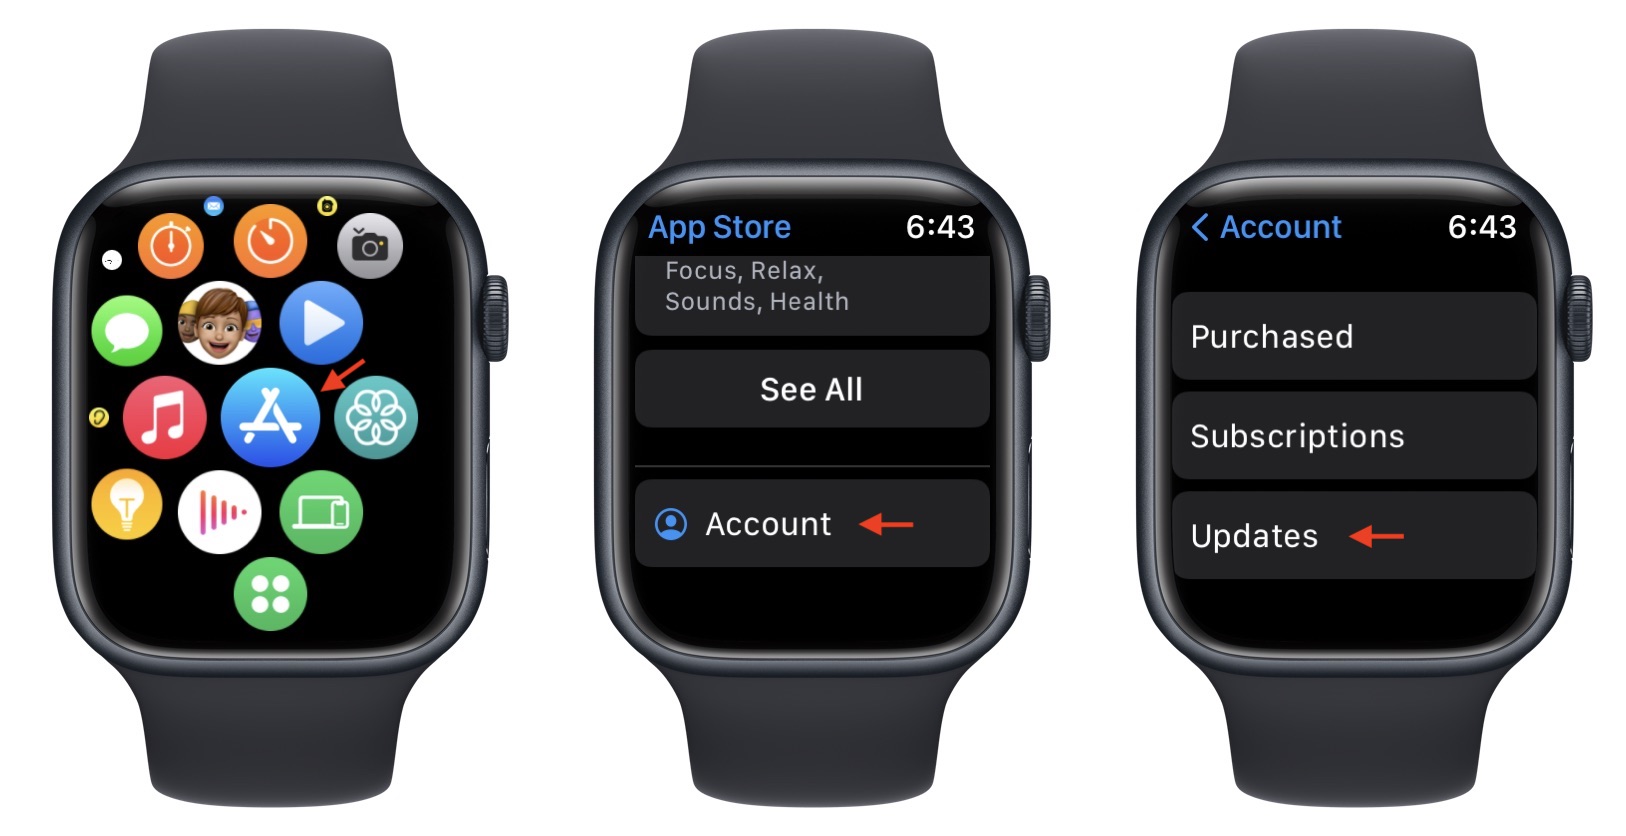 Update Apple Watch apps directly from the watch